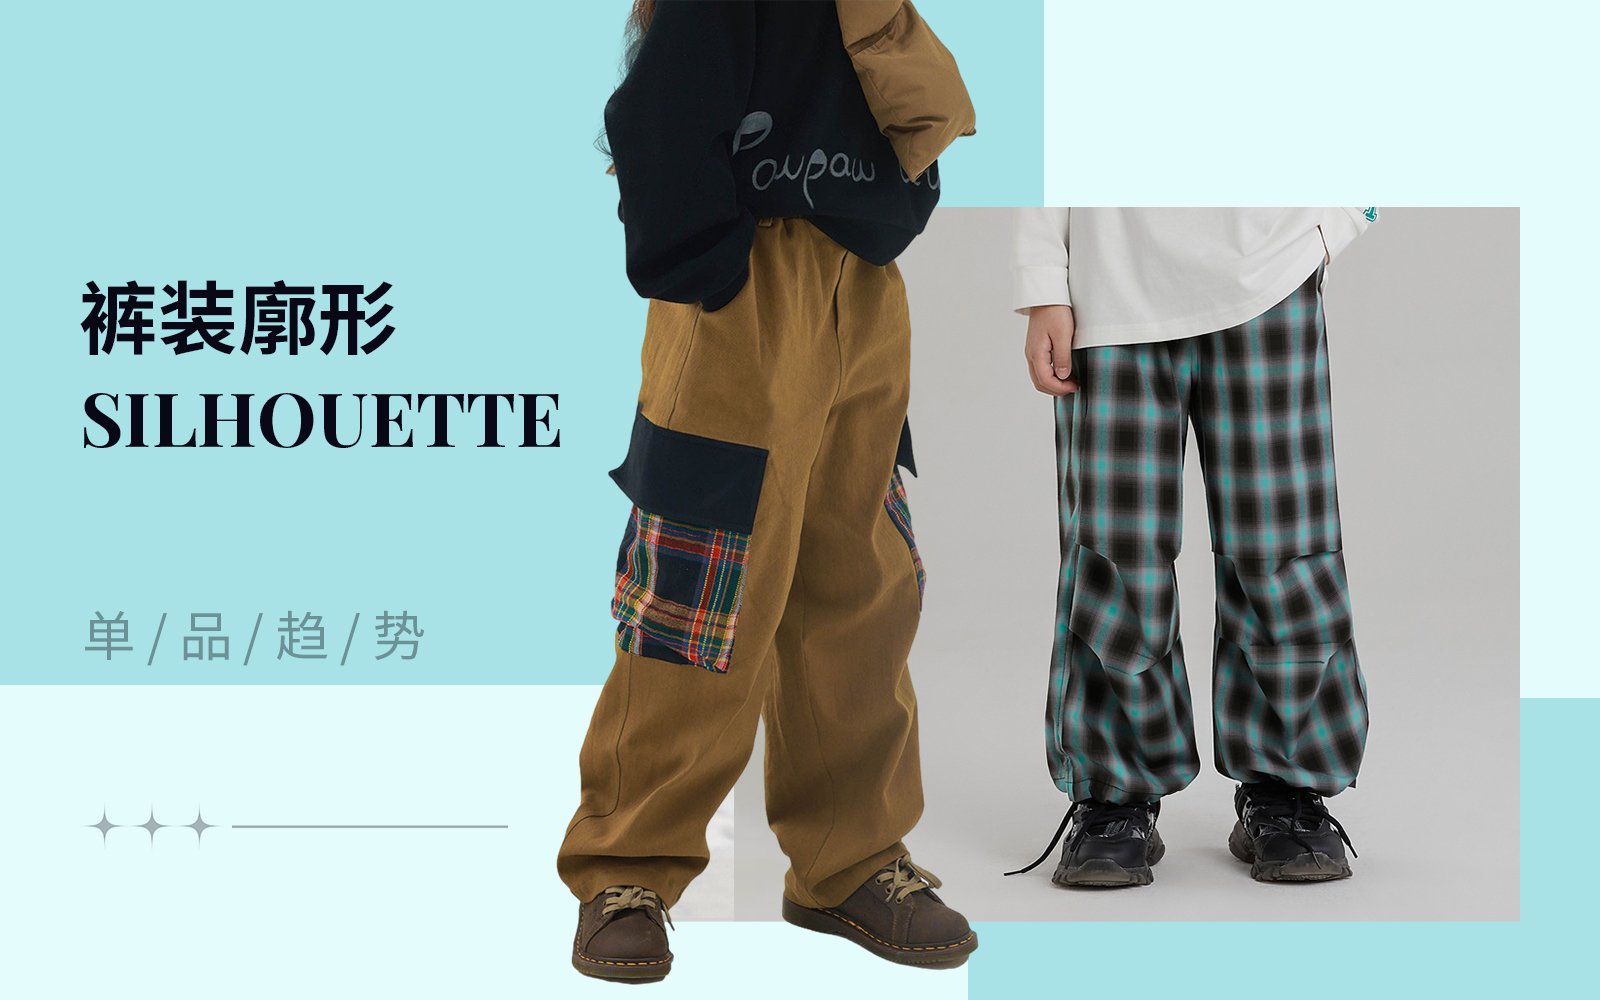 Pants -- The Silhouette Trend for Kidswear